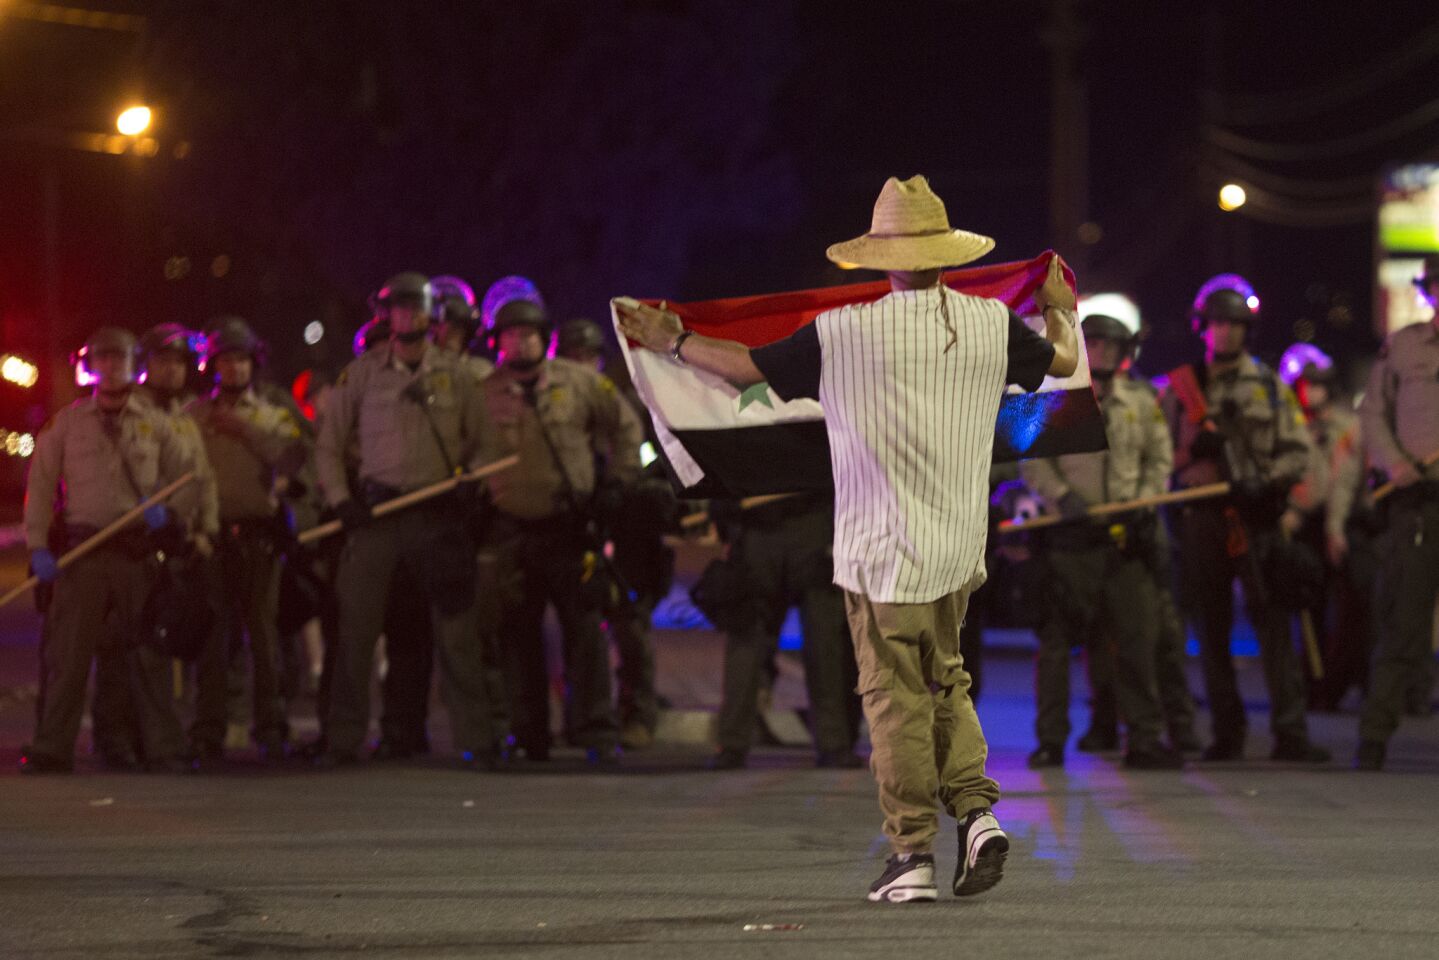 A protester walks toward sheriff's deputies in an intersection after an unlawful assembly was declared near the site where Alfred Olango had been shot by police earlier this week in El Cajon.